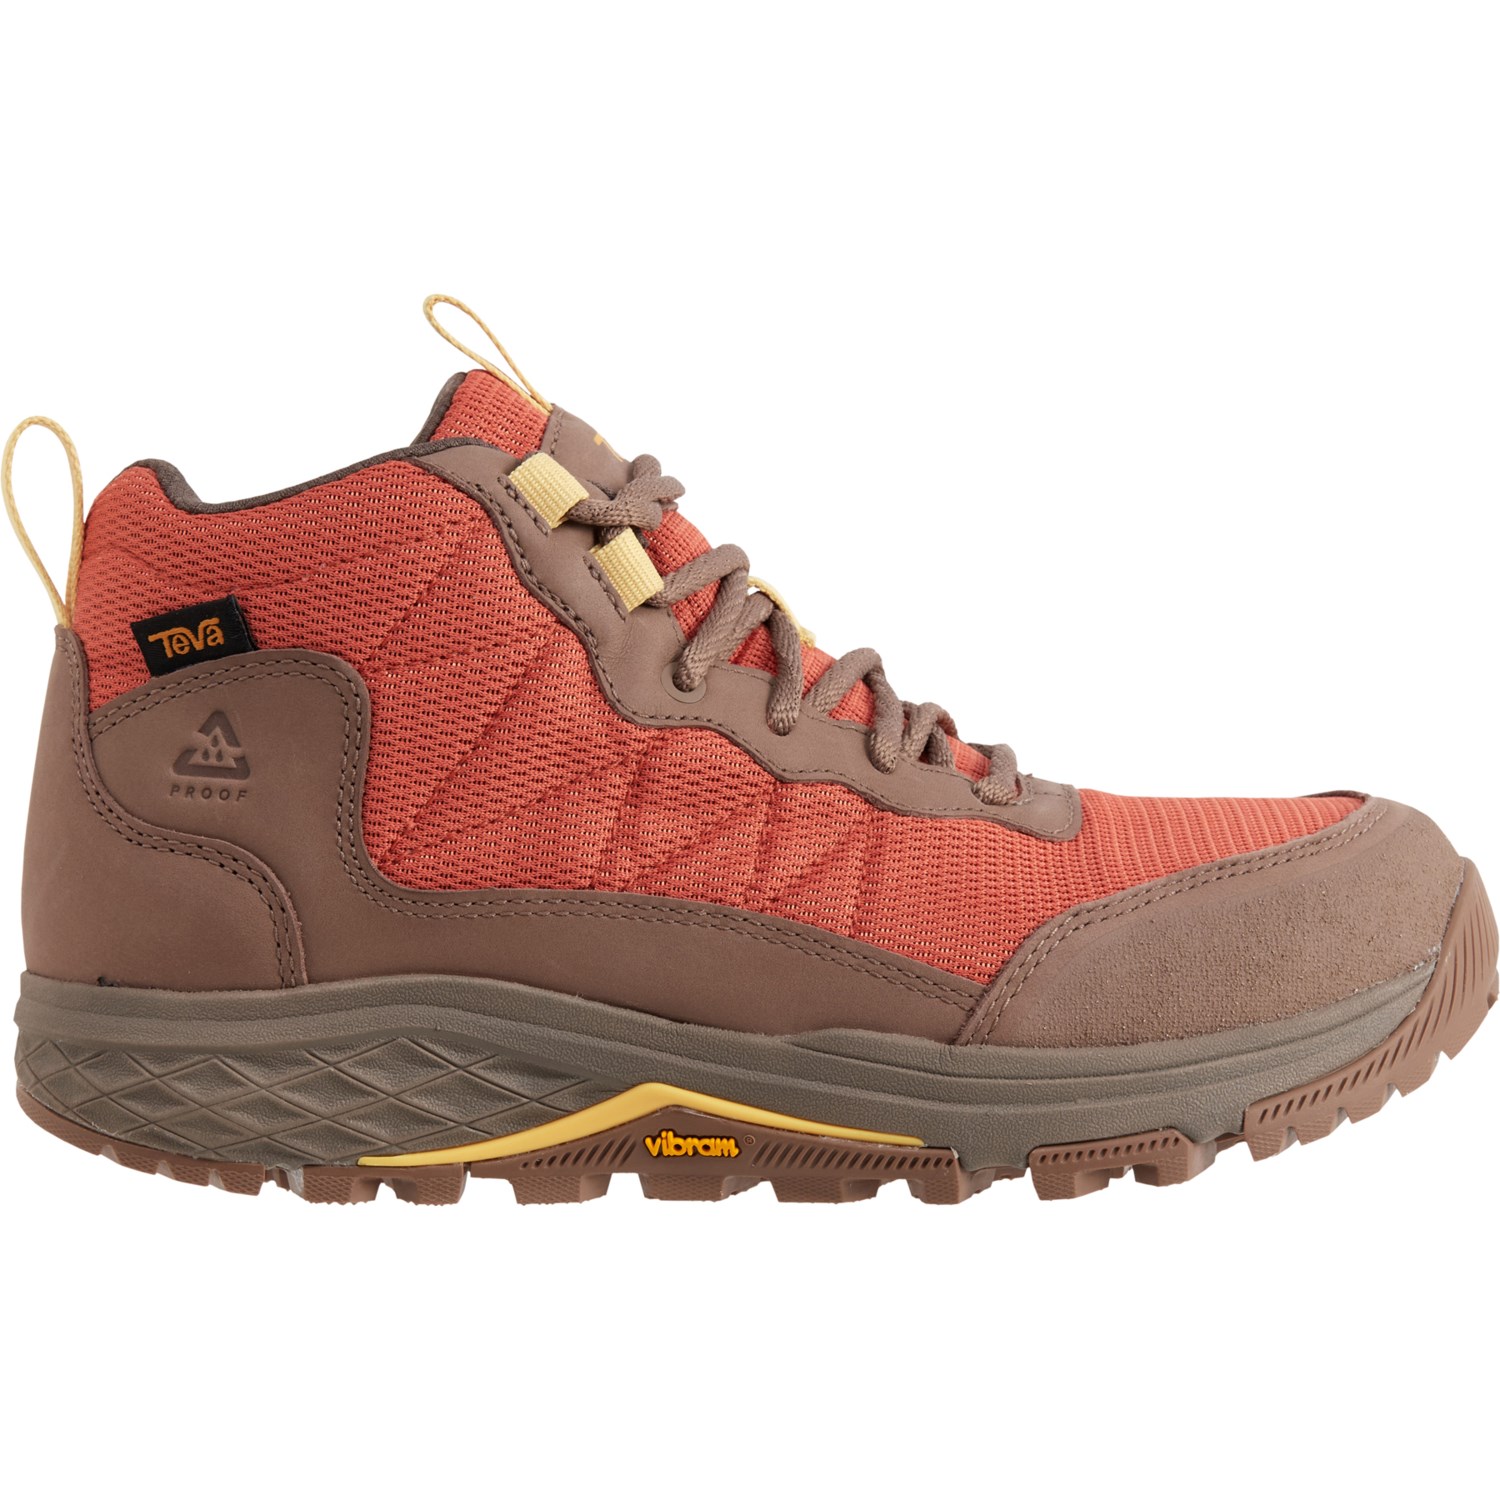 Teva Ridgeview RAPID PROOF Mid Hiking Boots (For Women) - Save 60%